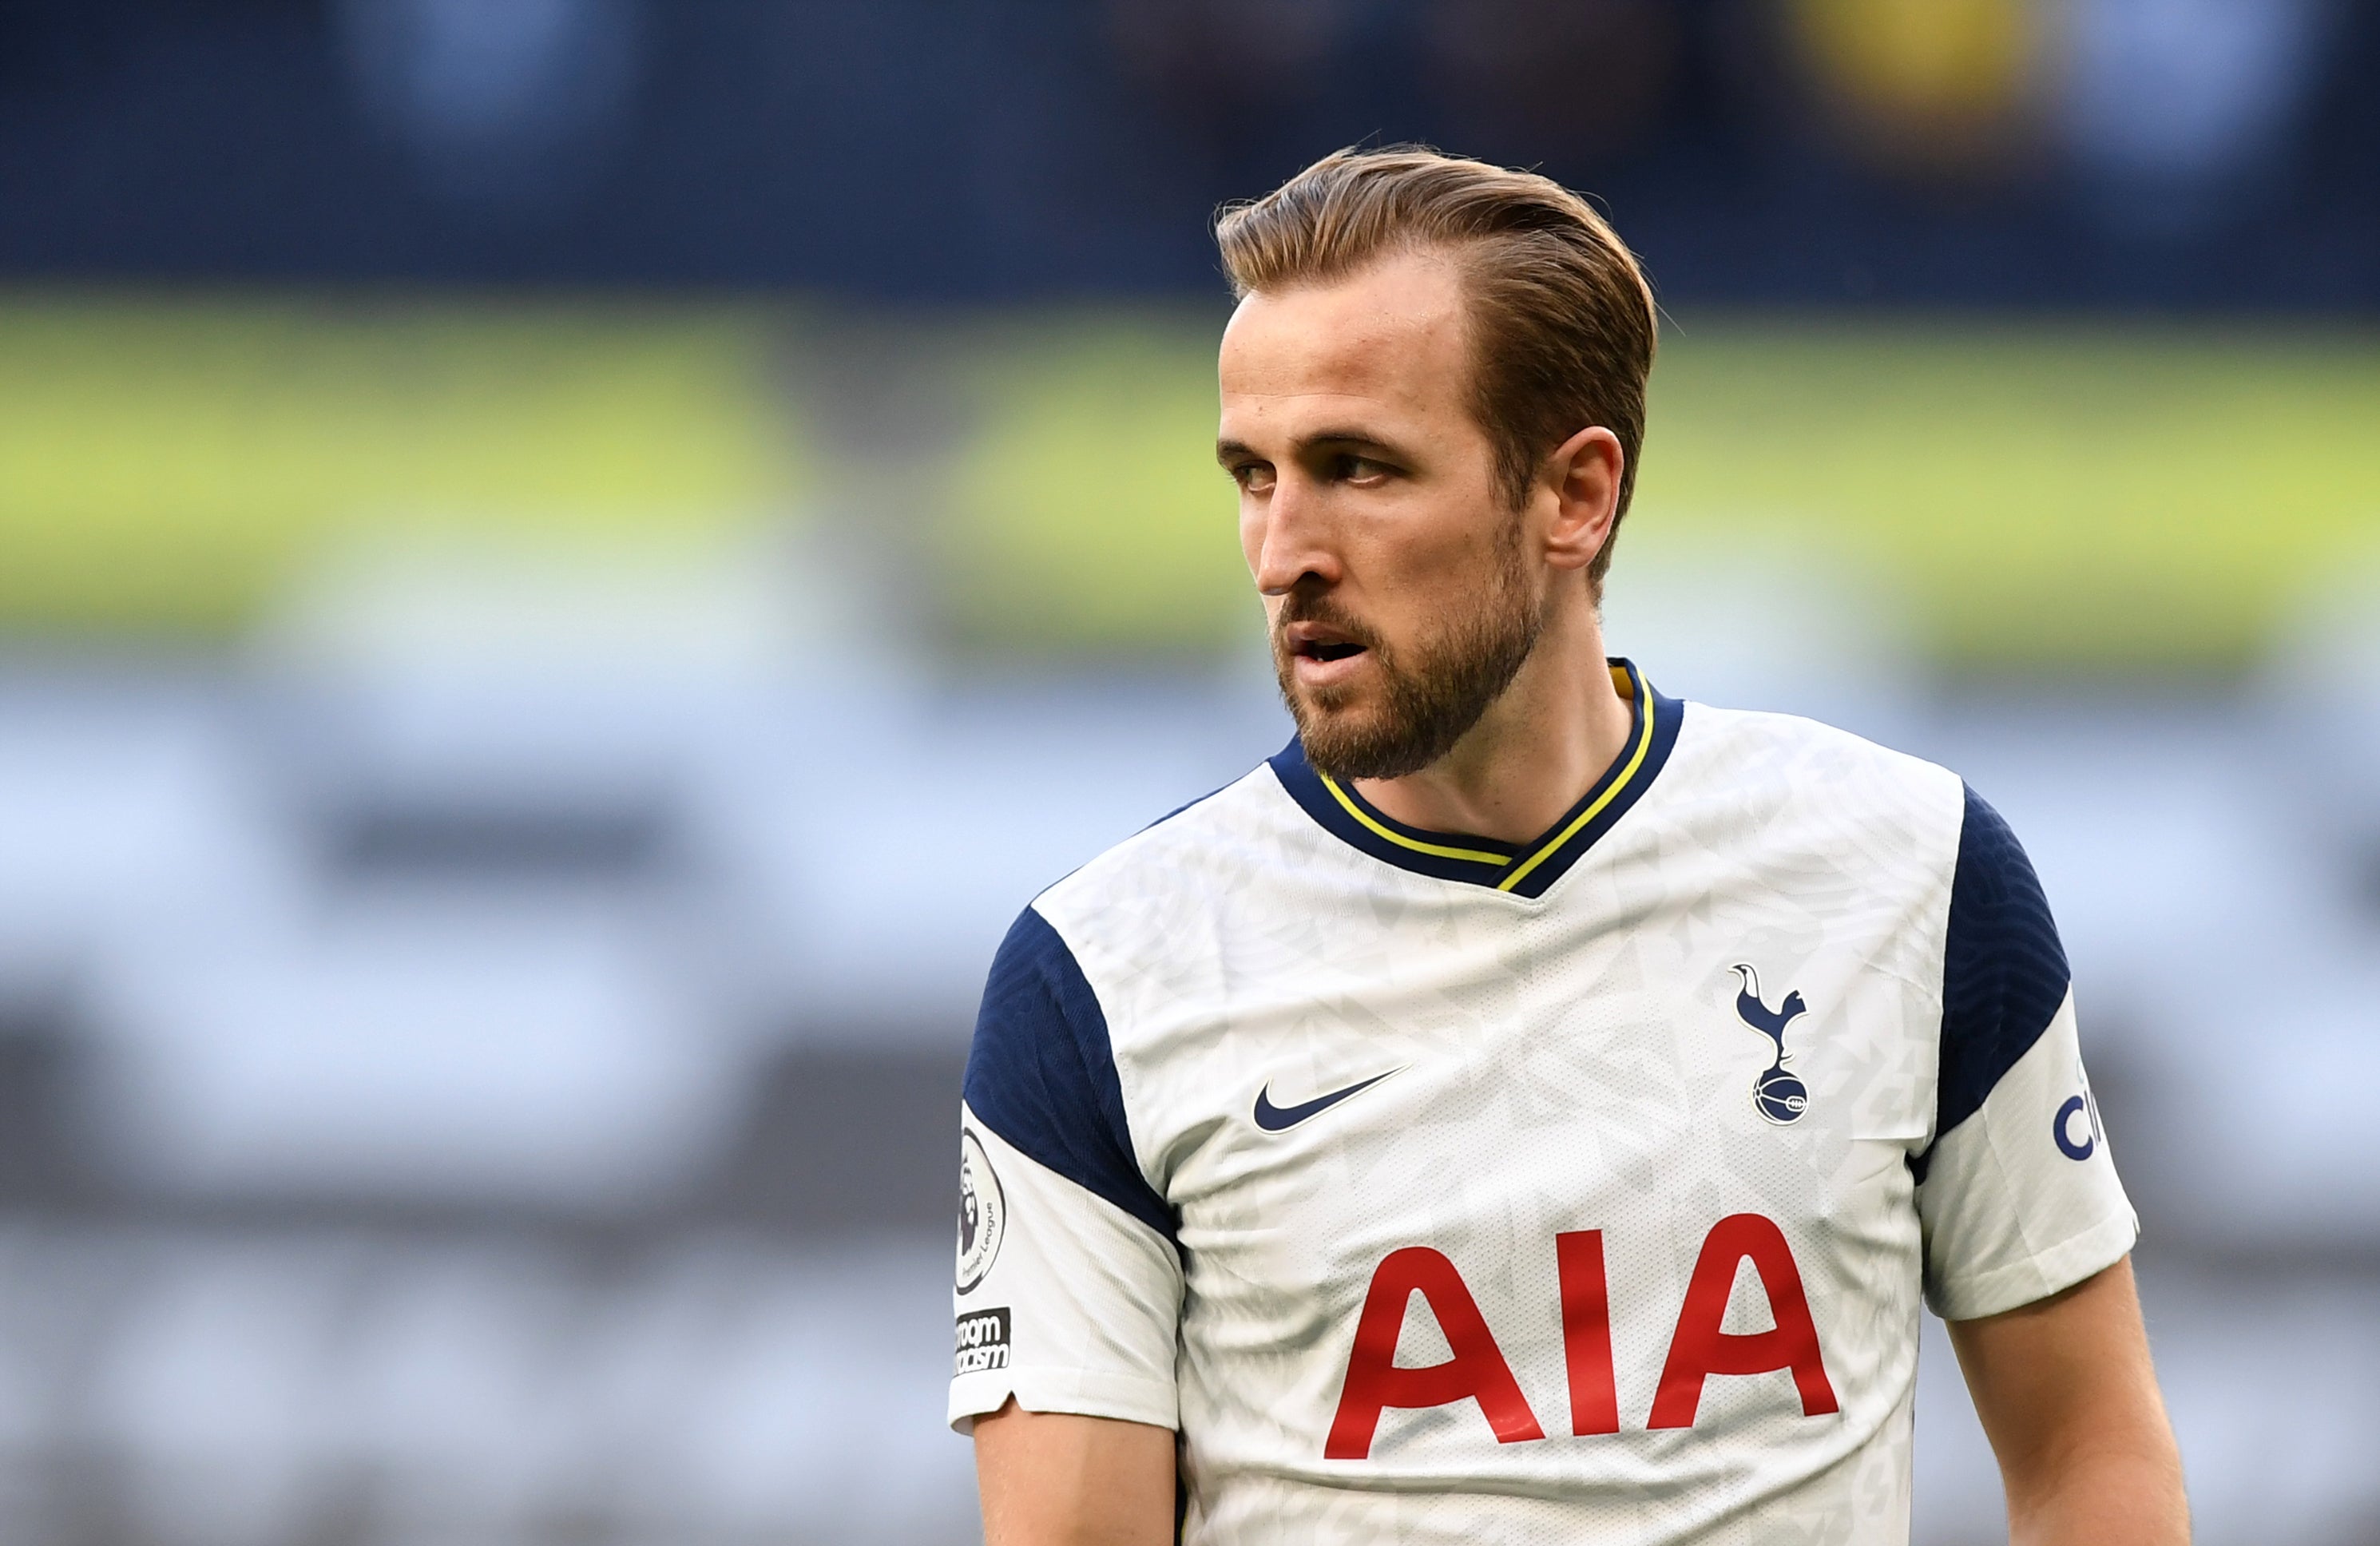 Harry Kane will continue to work on his fitness after missing Tottenham’s win over Manchester City (Daniel Leal-Olivas/PA)